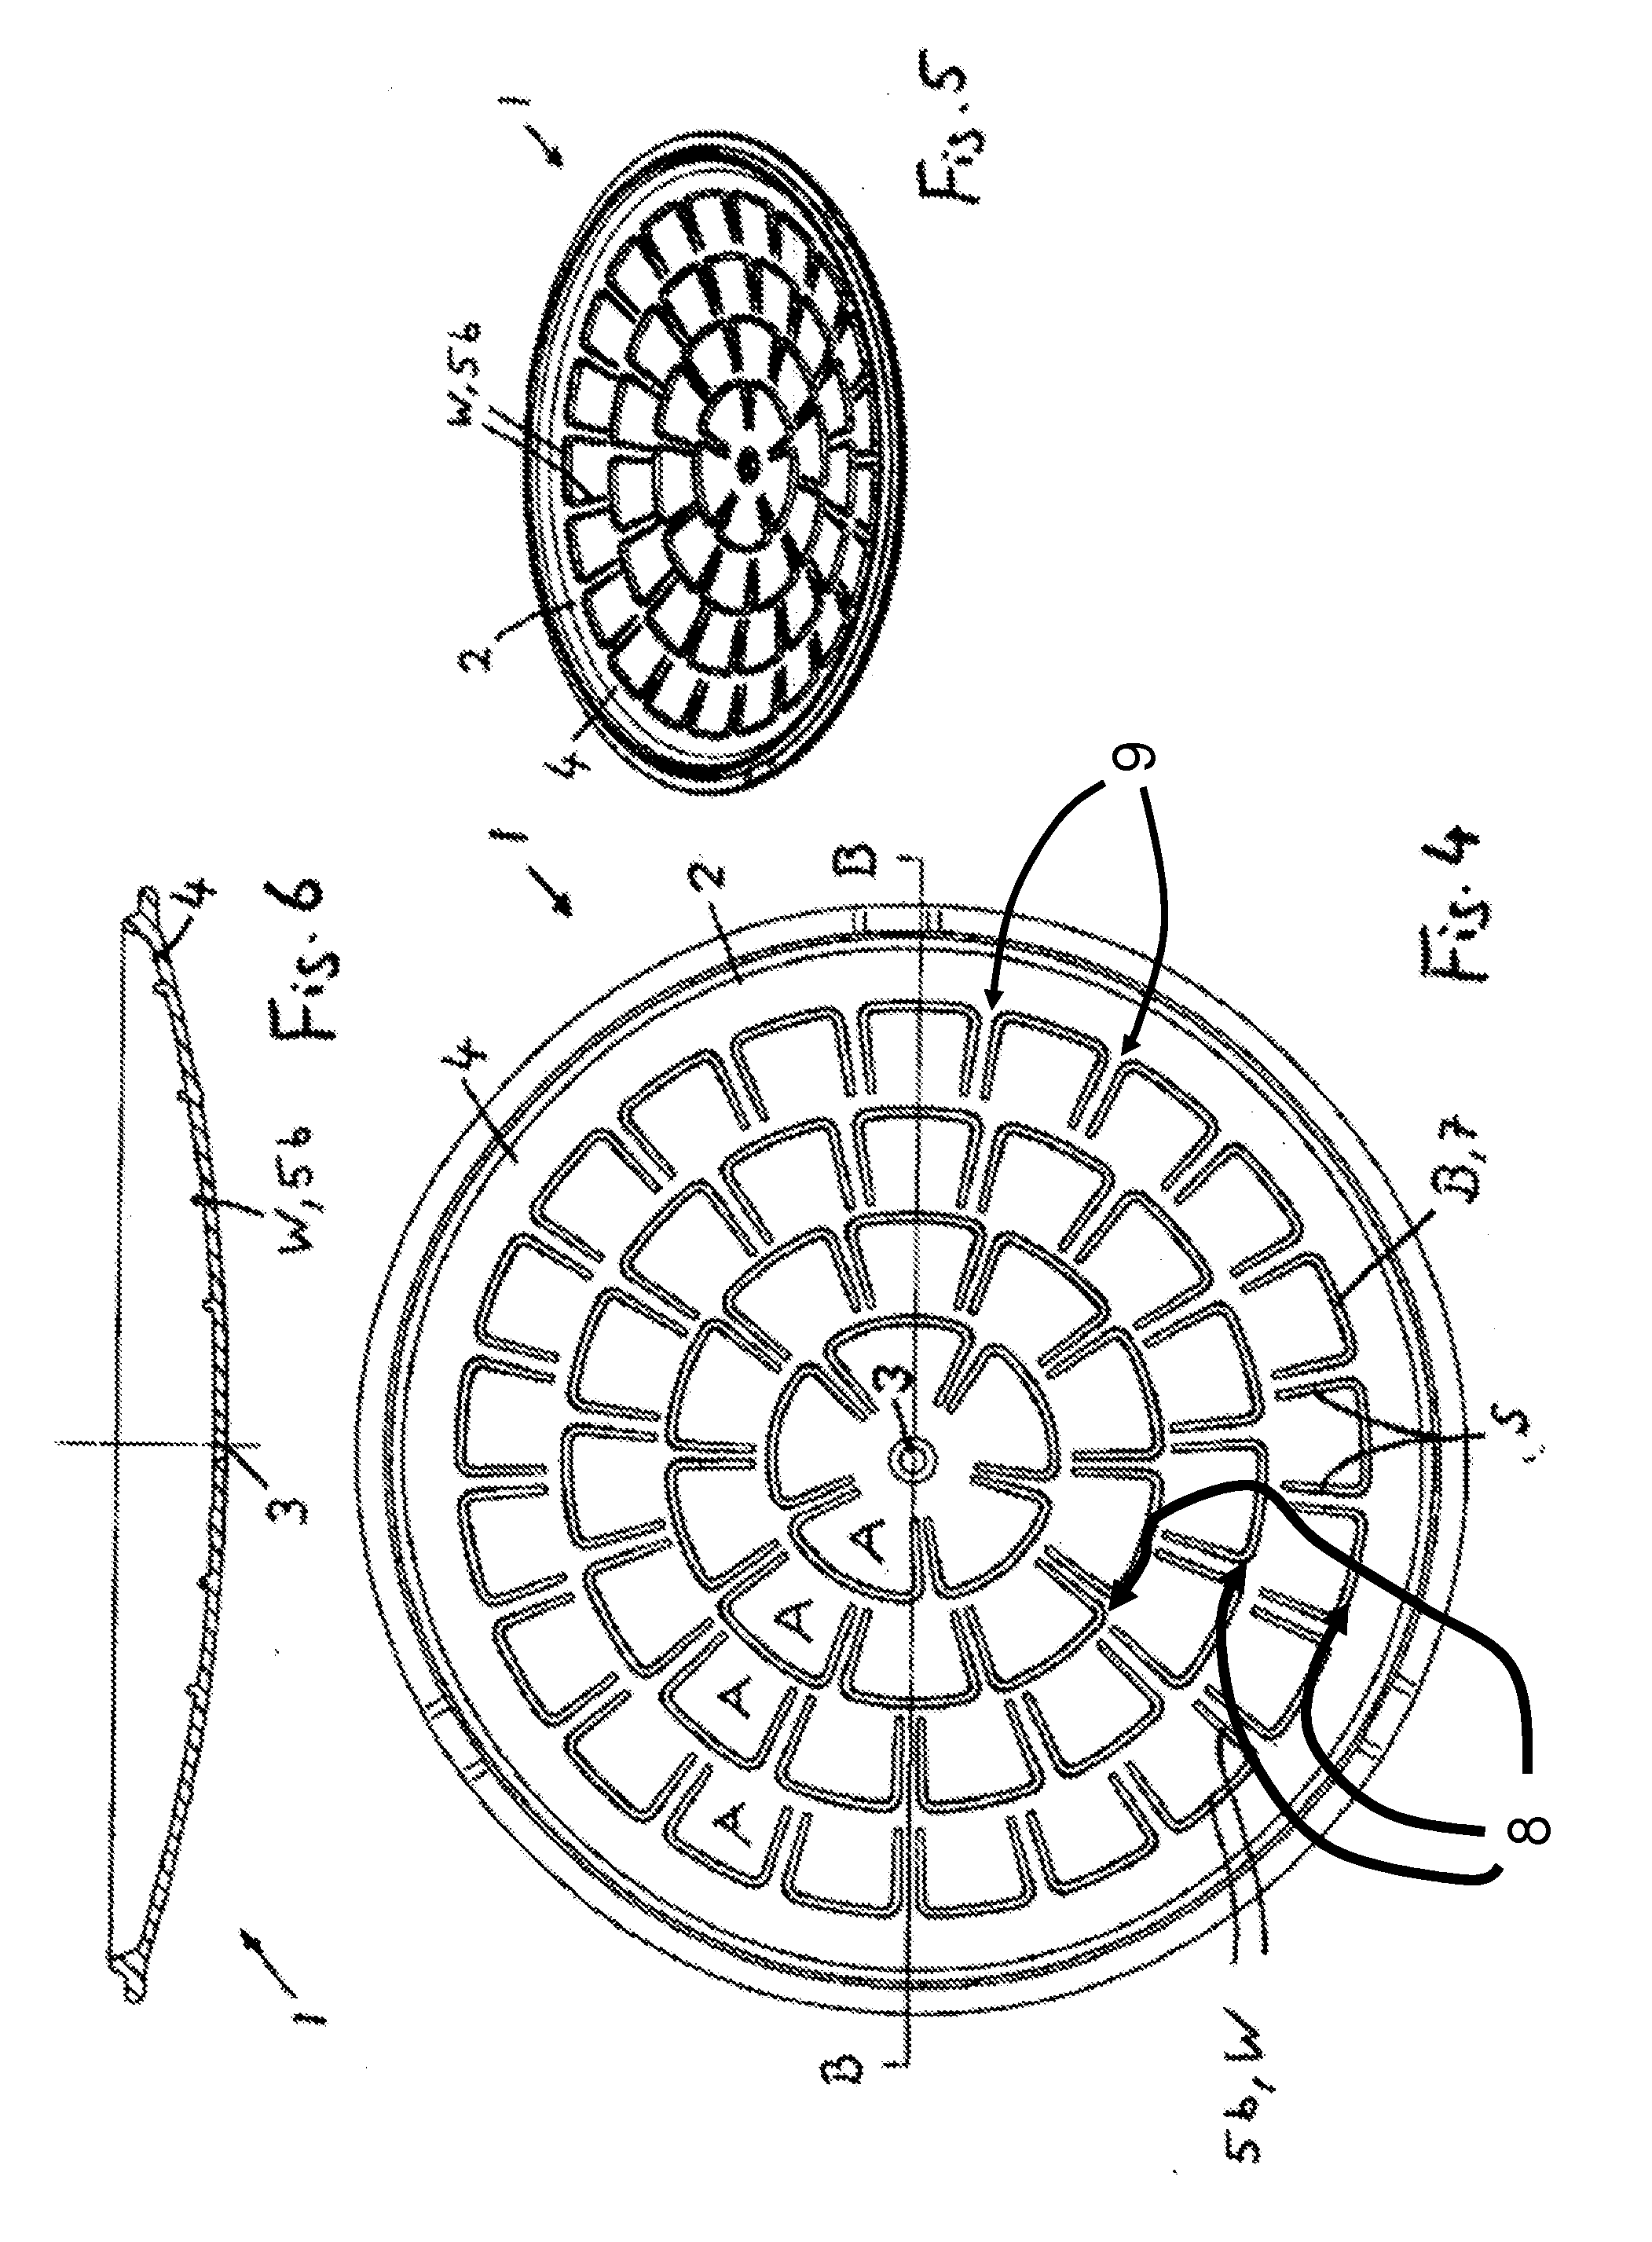 Lid for a Cooking Vessel